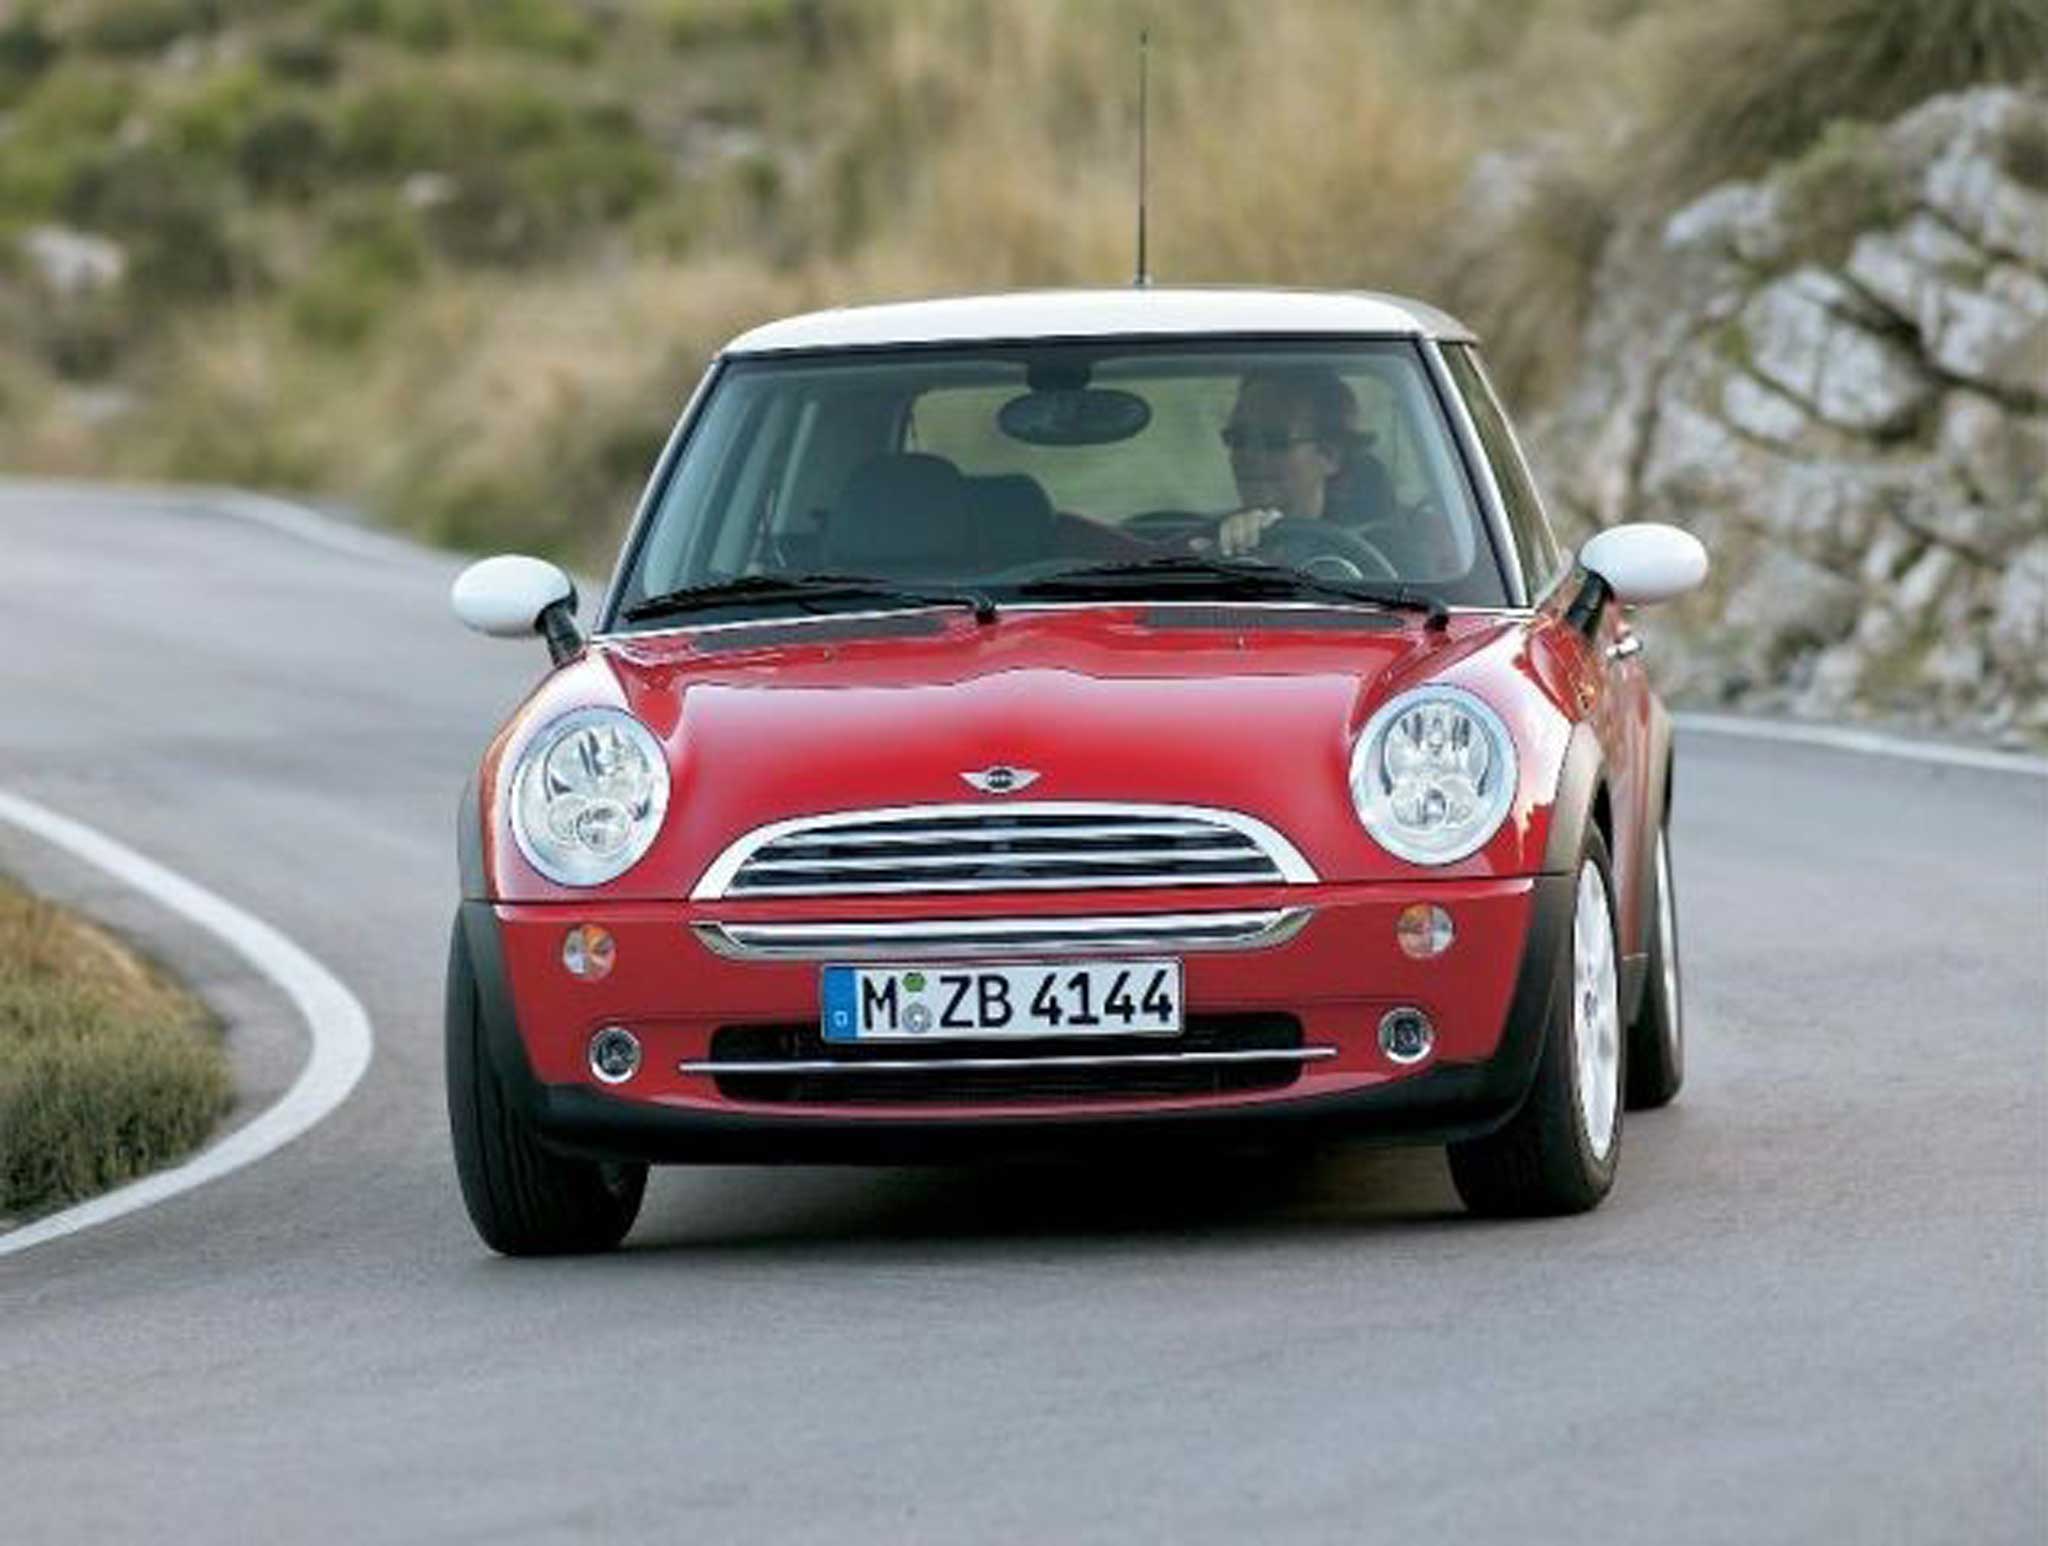 A Mini Cooper is the perfect small-car package